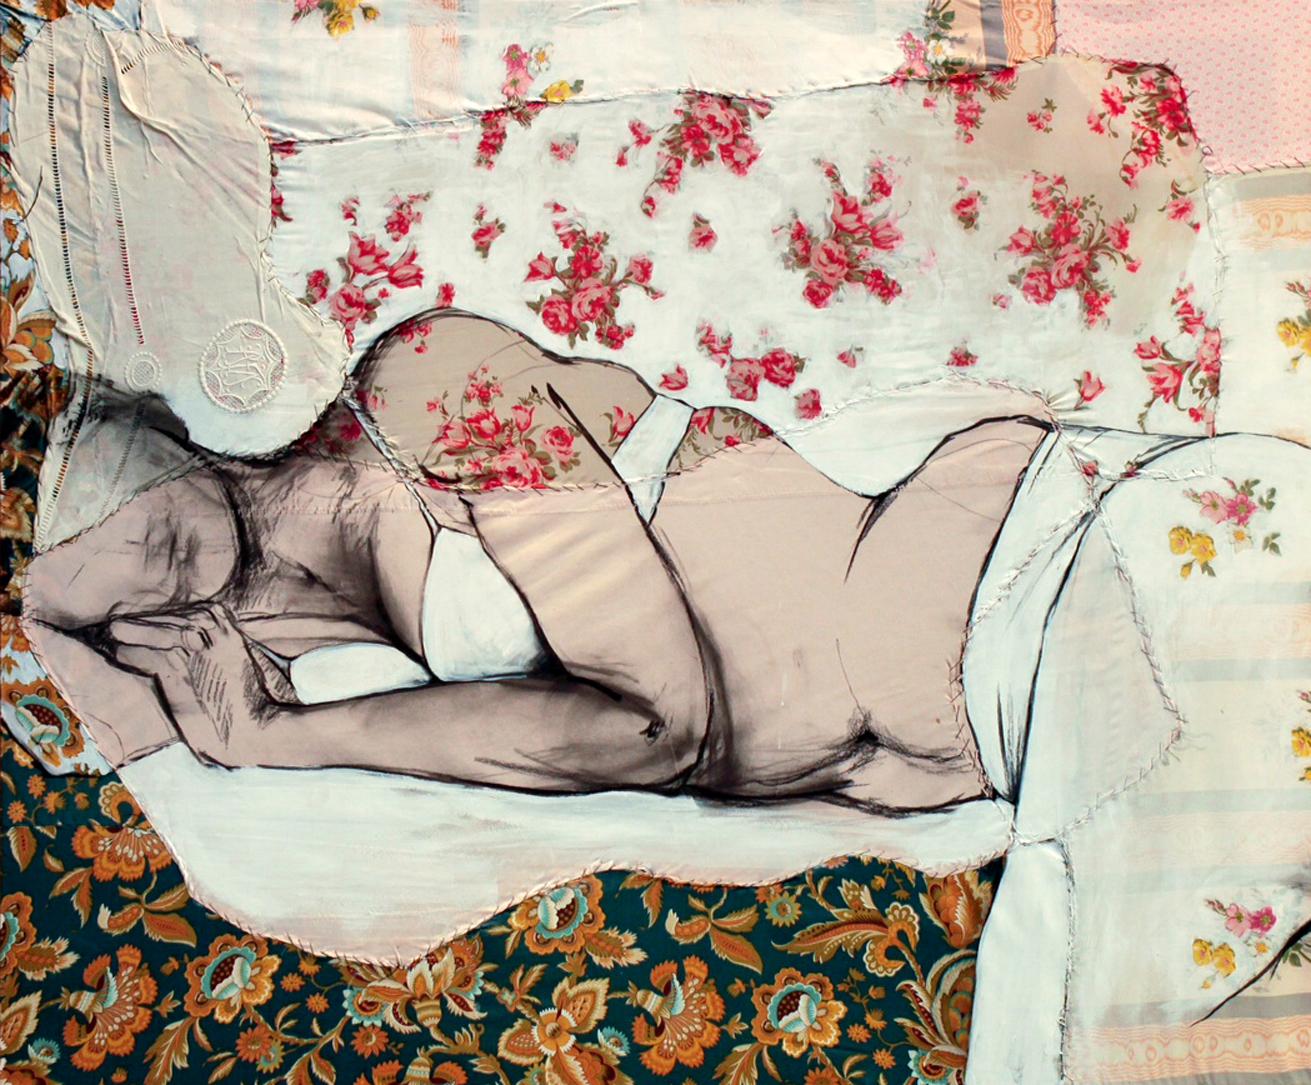 Lea 4, sensual fabric painting of sleeping woman, by Anne Valérie Dupond